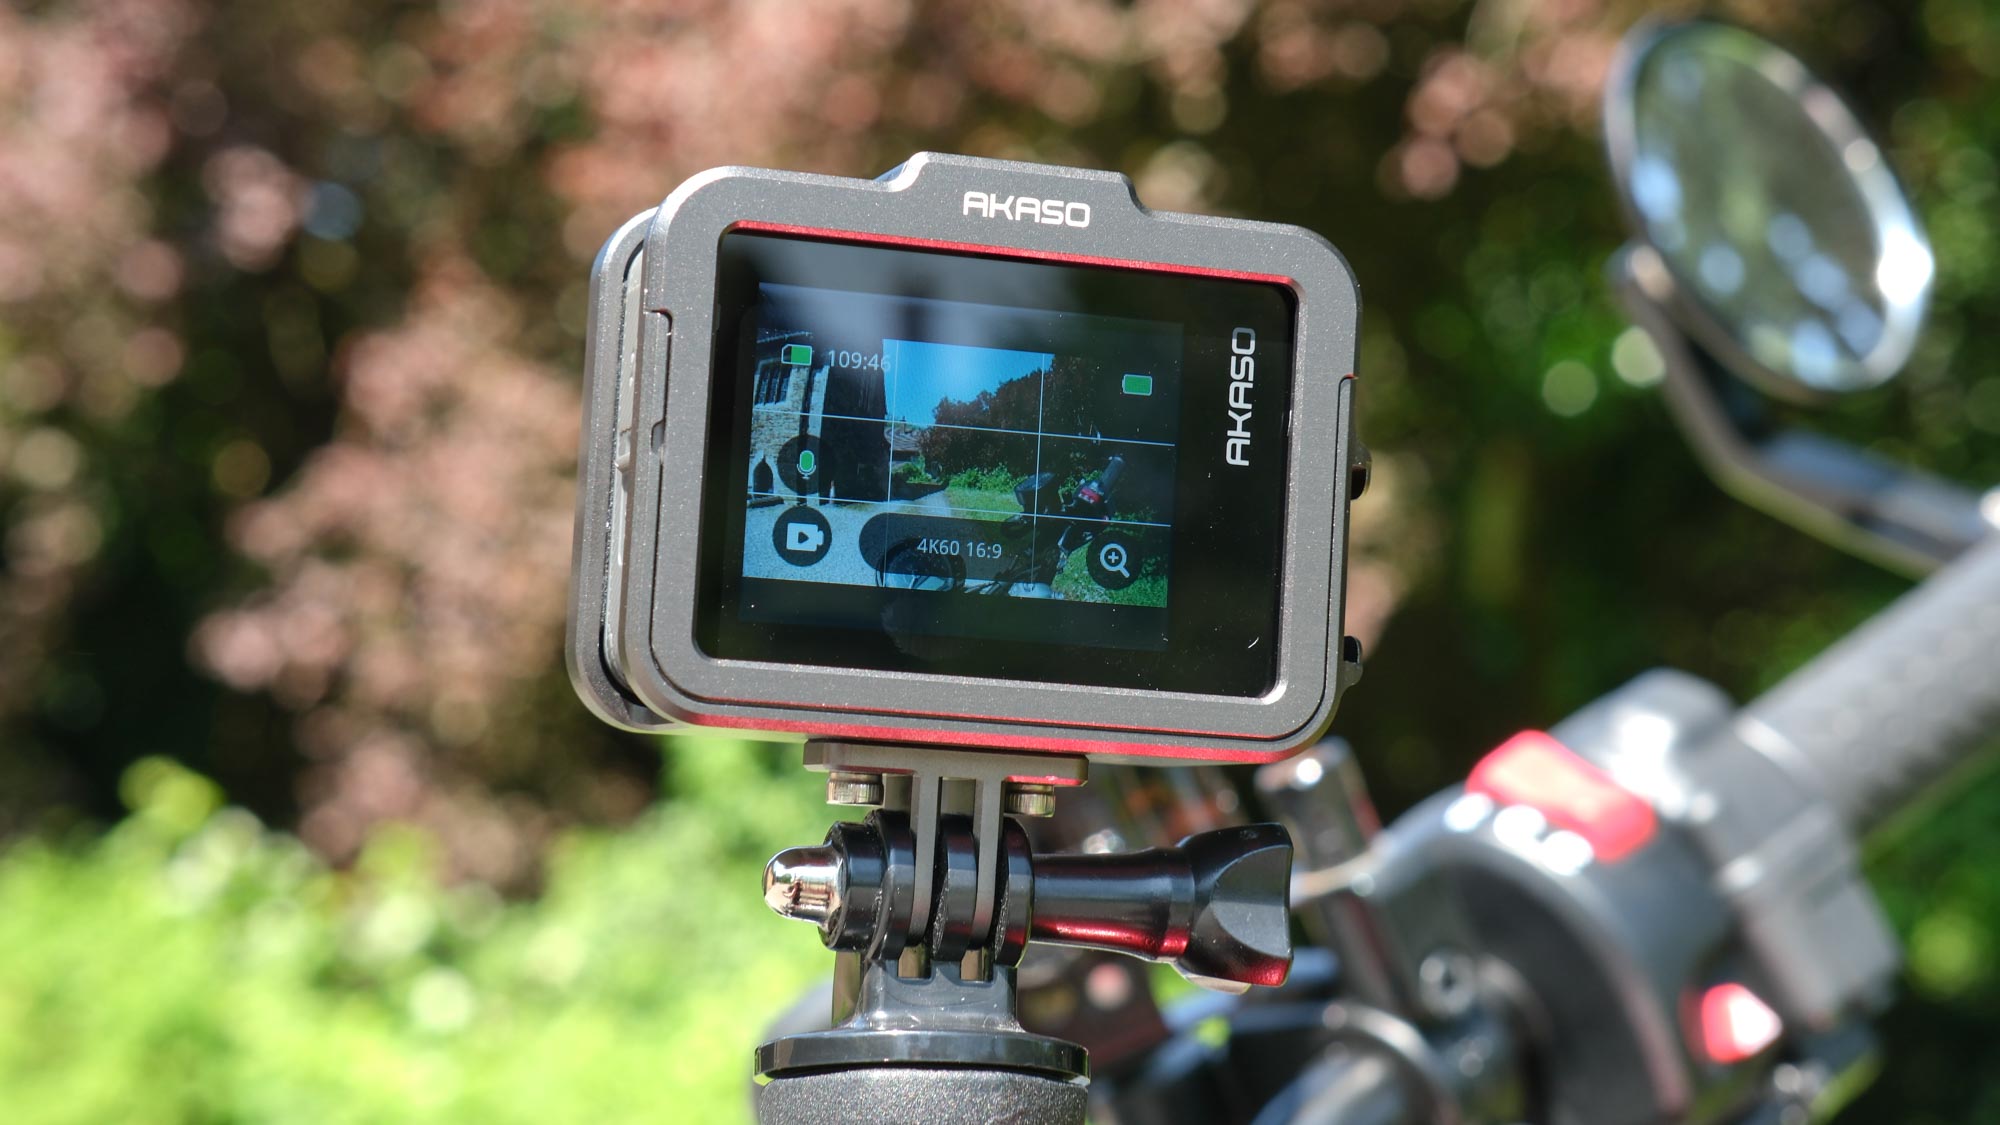 A photo of the rear screen of the Akaso Brave 8 Lite against a green, out of focus background.